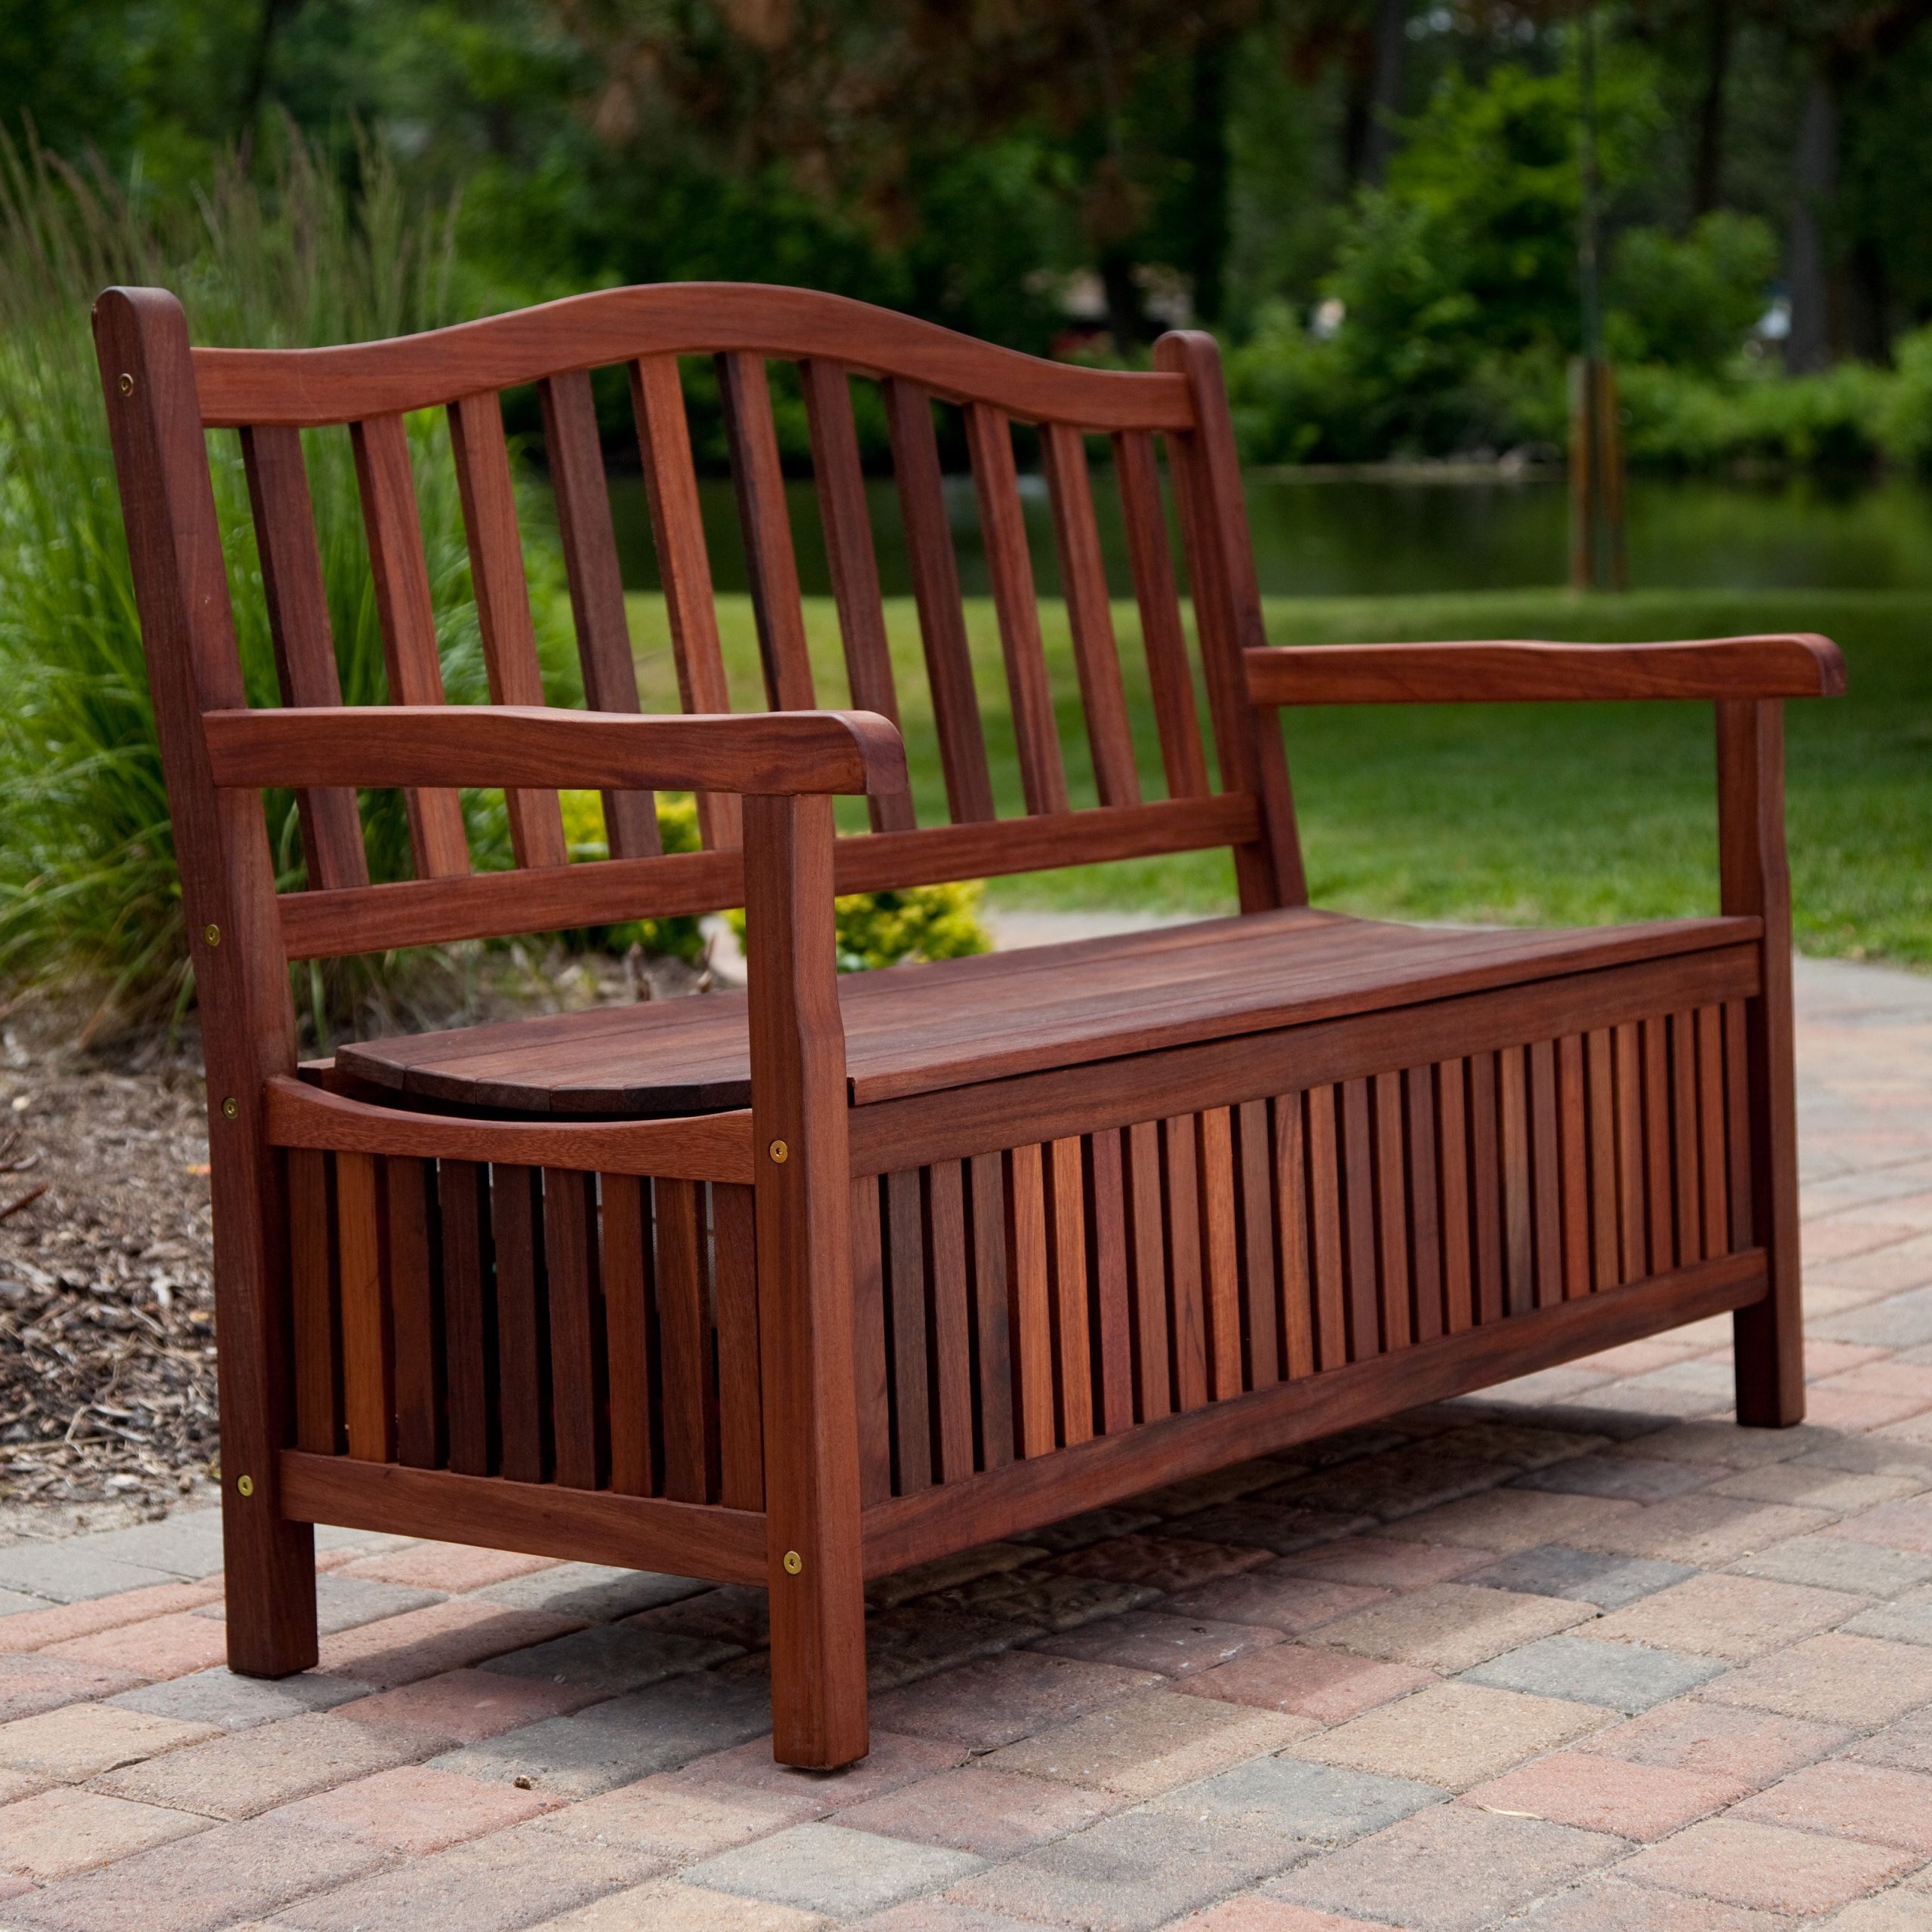 Storage Patio Benches
 Solid wood bench – benches – reclaimed rustic wood